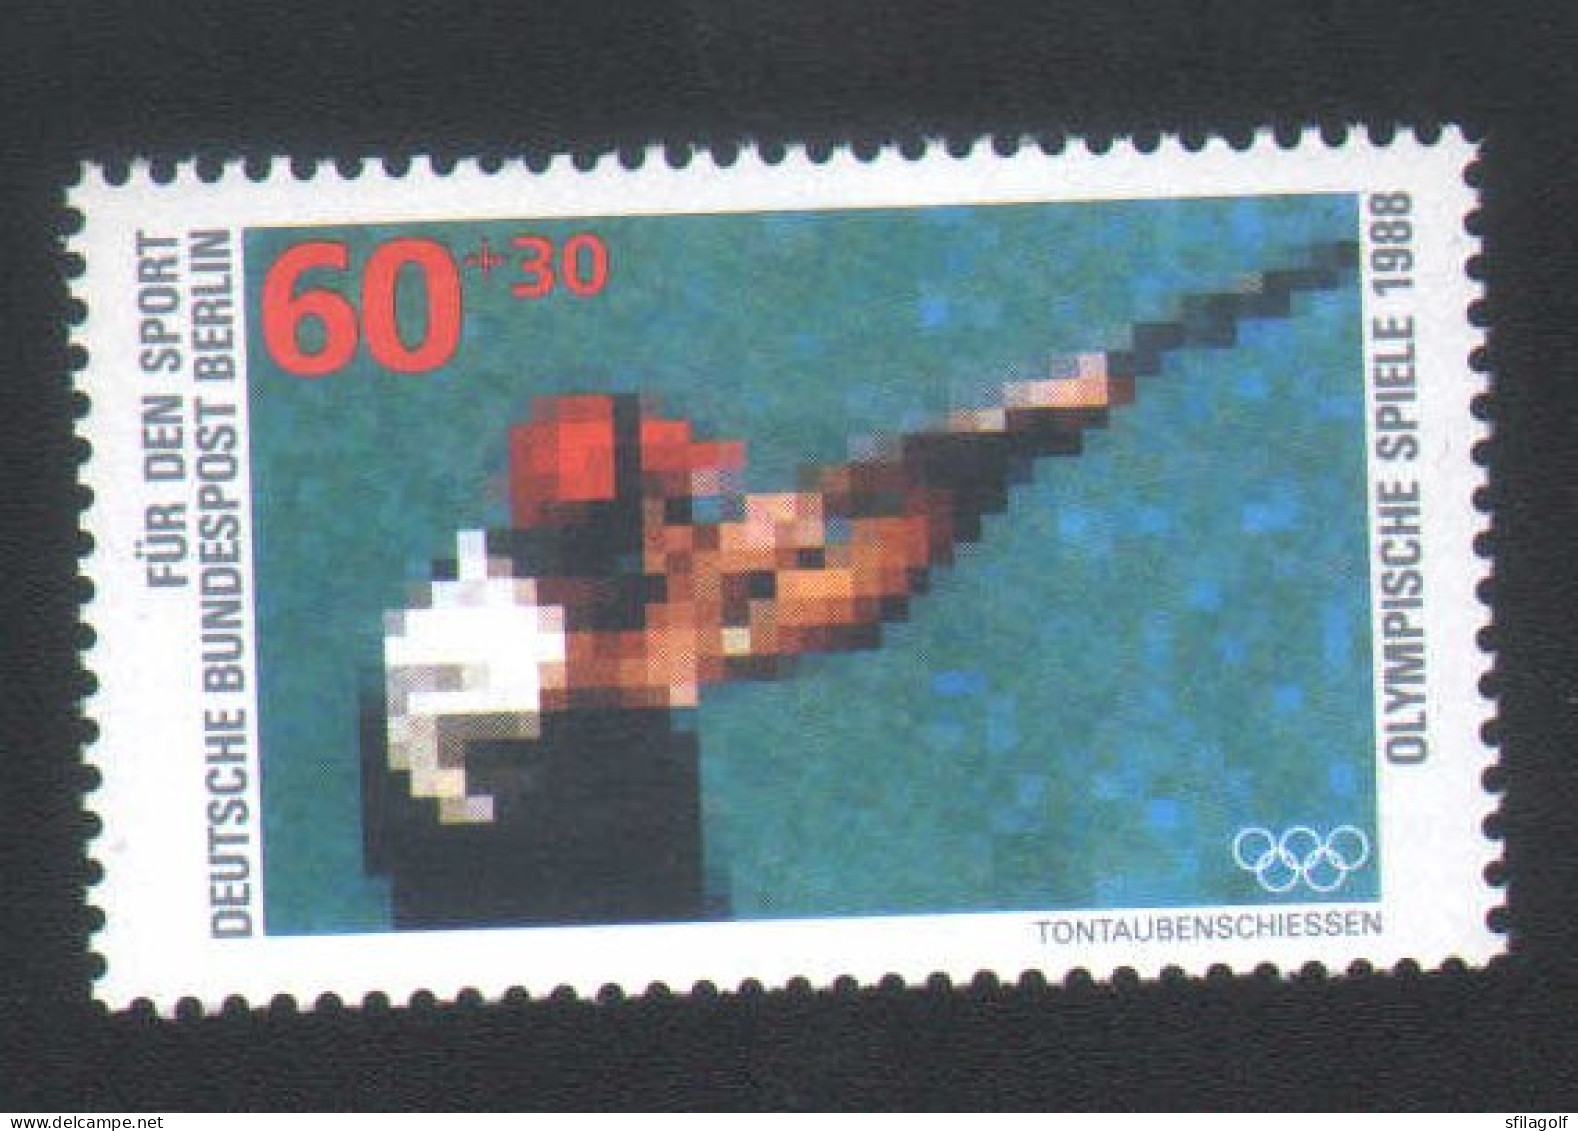 Allemagne - Germany - 1988 - Tir - Shooting - Jeux Olympiques - Olympic Games - Neuf - Mint - Tiro (armi)